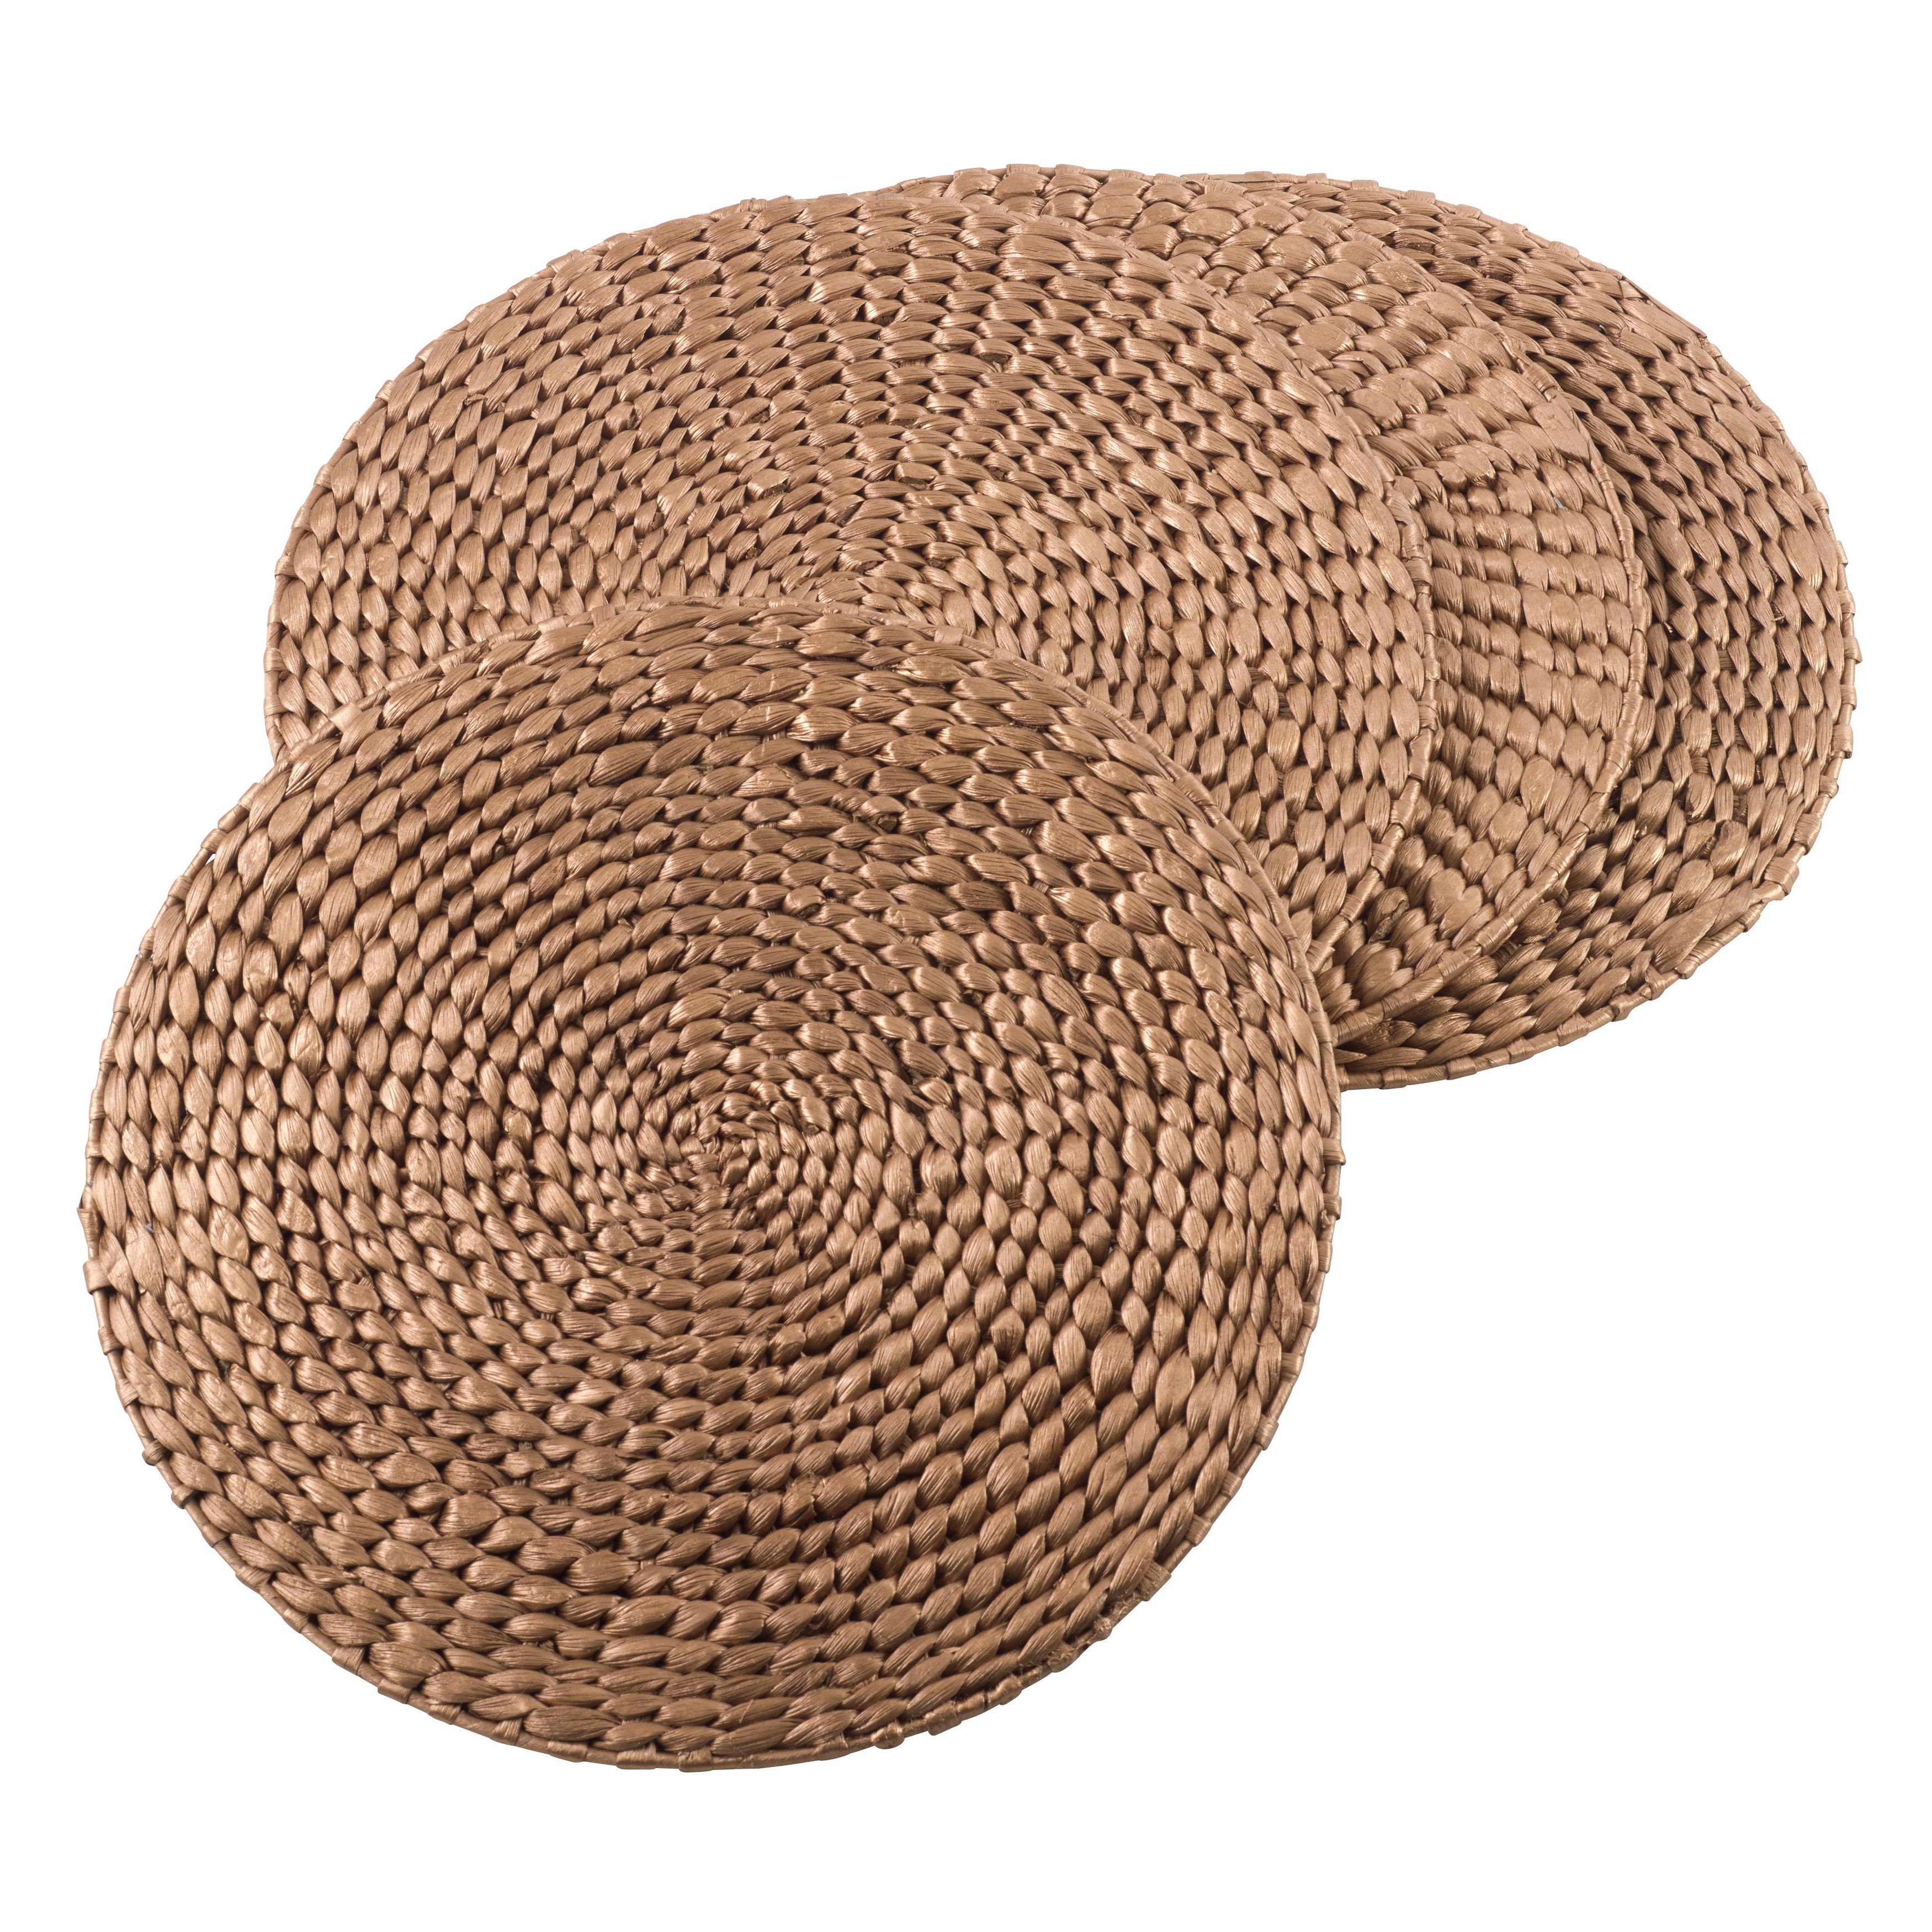 Preferred 4 Piece Handwoven Wheel Wall Decor Sets Within Shop Natural Water Hyacinth Decorative Round Hand Woven Rattan (View 16 of 20)